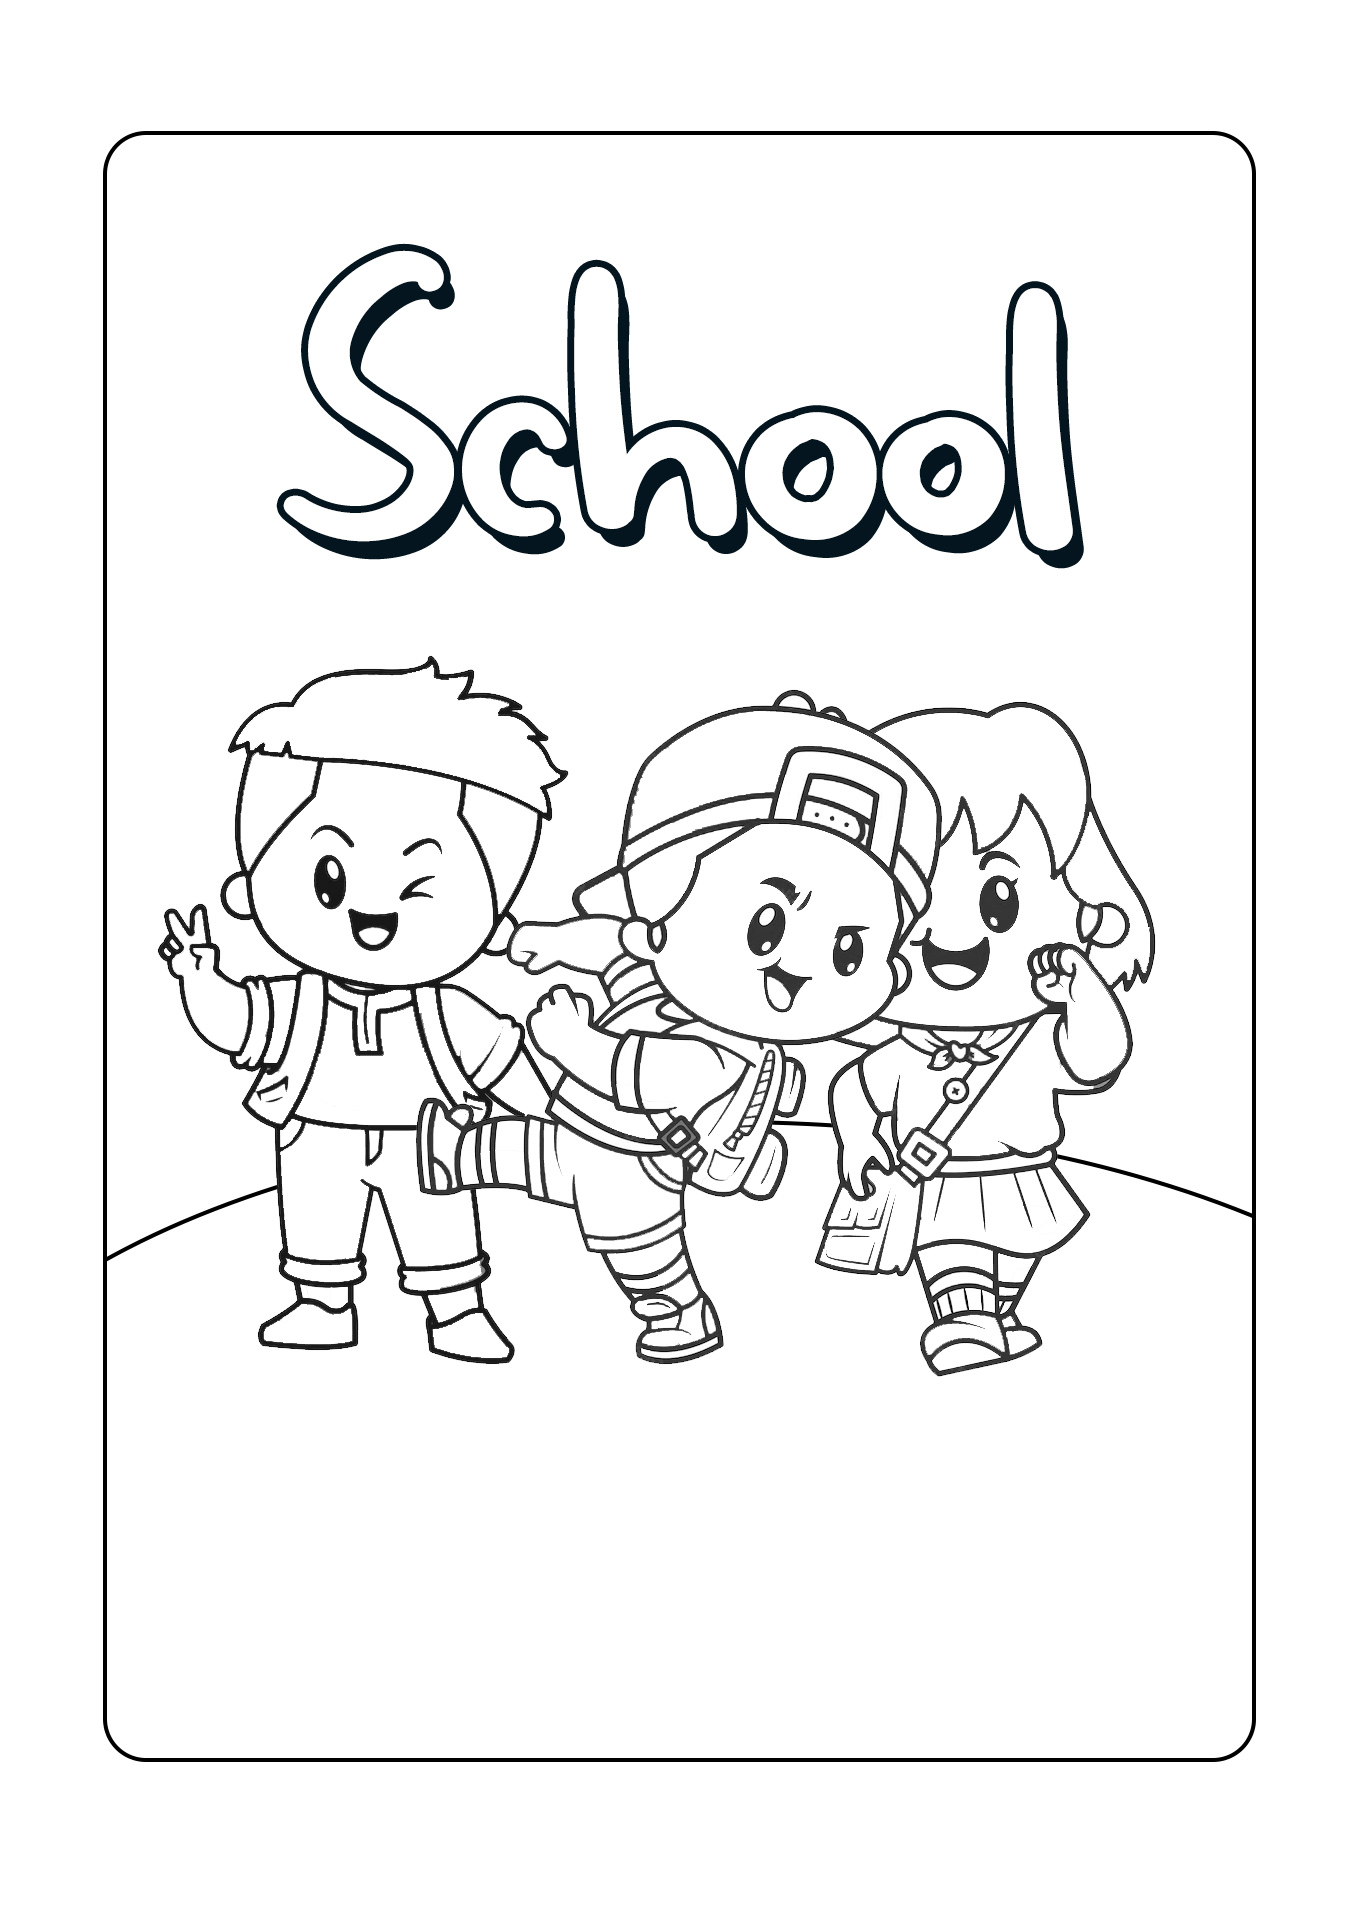 School Children Coloring Pages